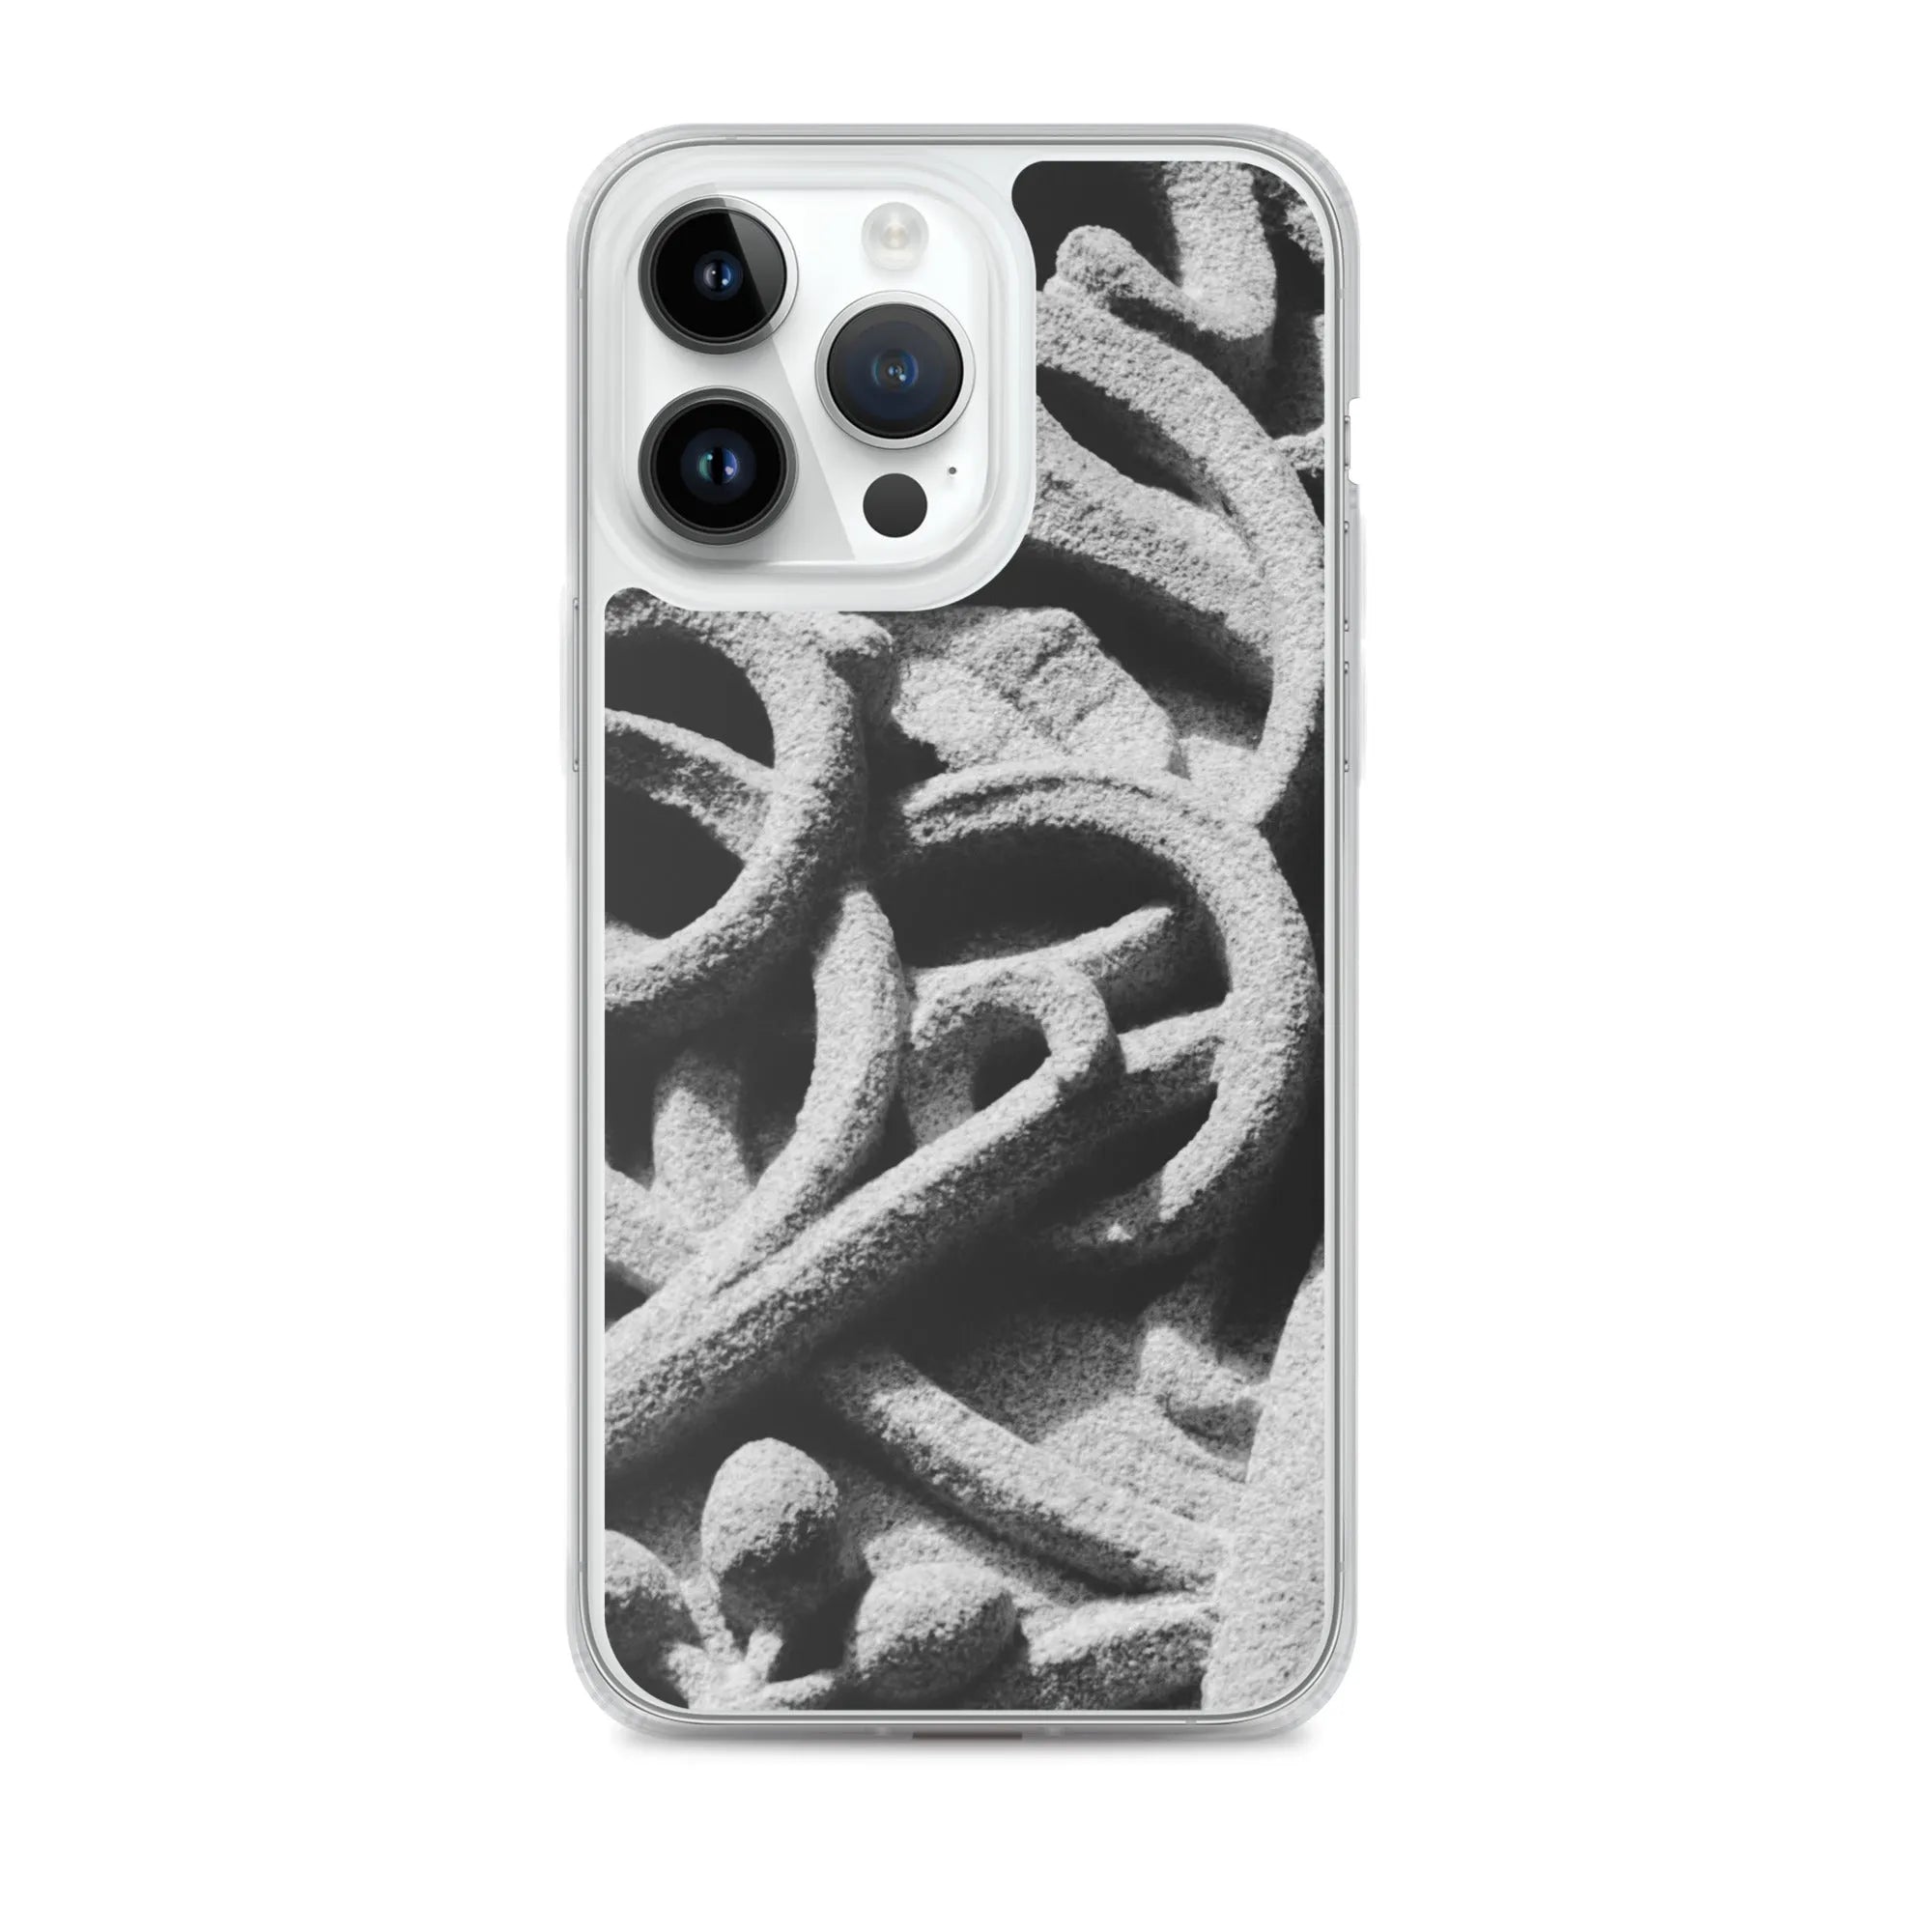 Labyrinth - Designer Travels Art Iphone Case - Black And White - Iphone 14 Pro Max - Mobile Phone Cases - Aesthetic Art